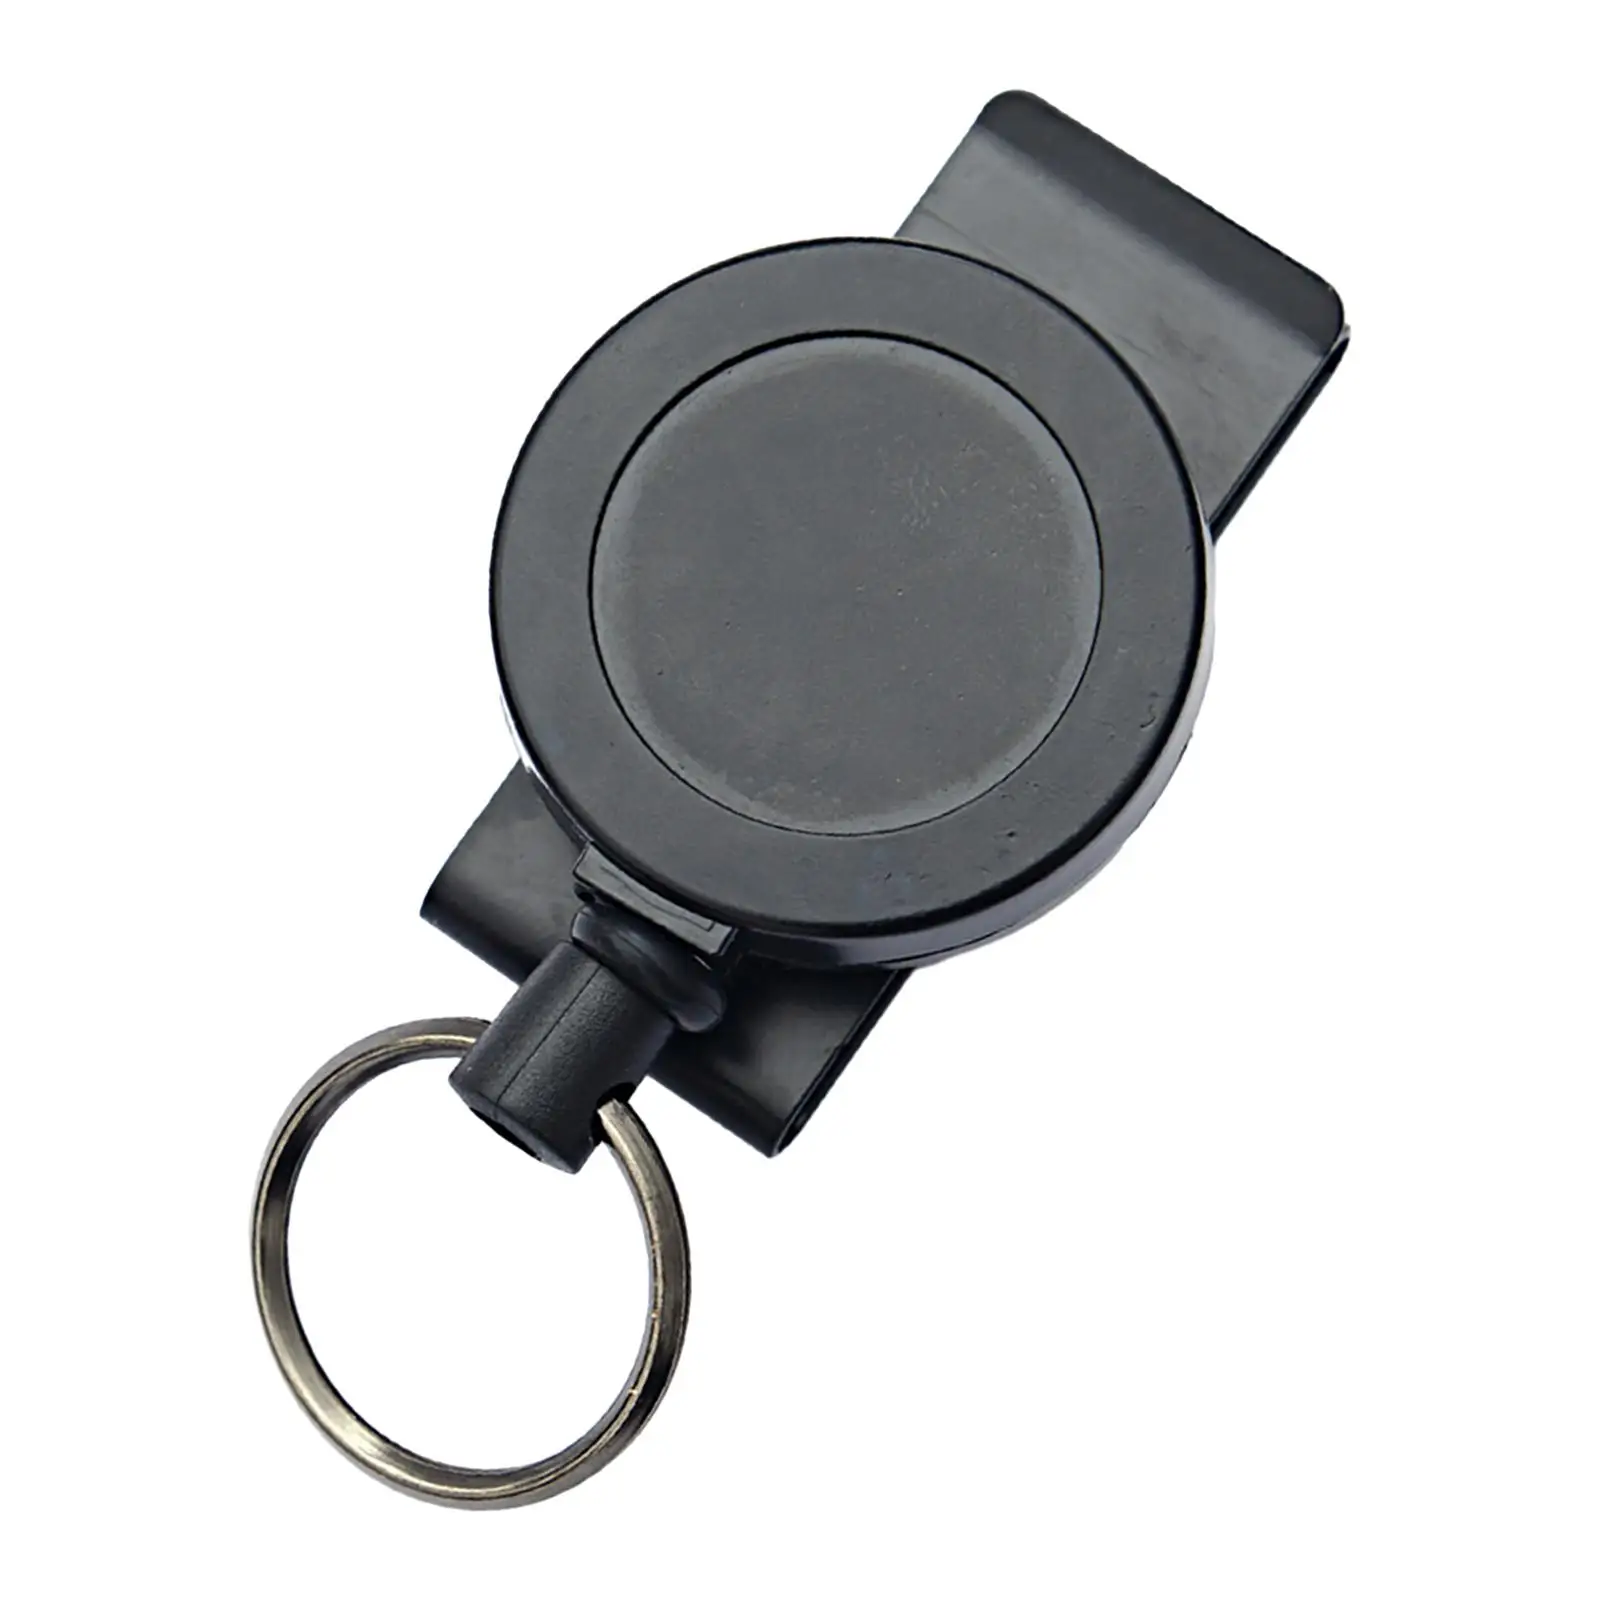 Heavy Duty Retractable Keychain Durable Key Rings for Offices Hiking Outdoor